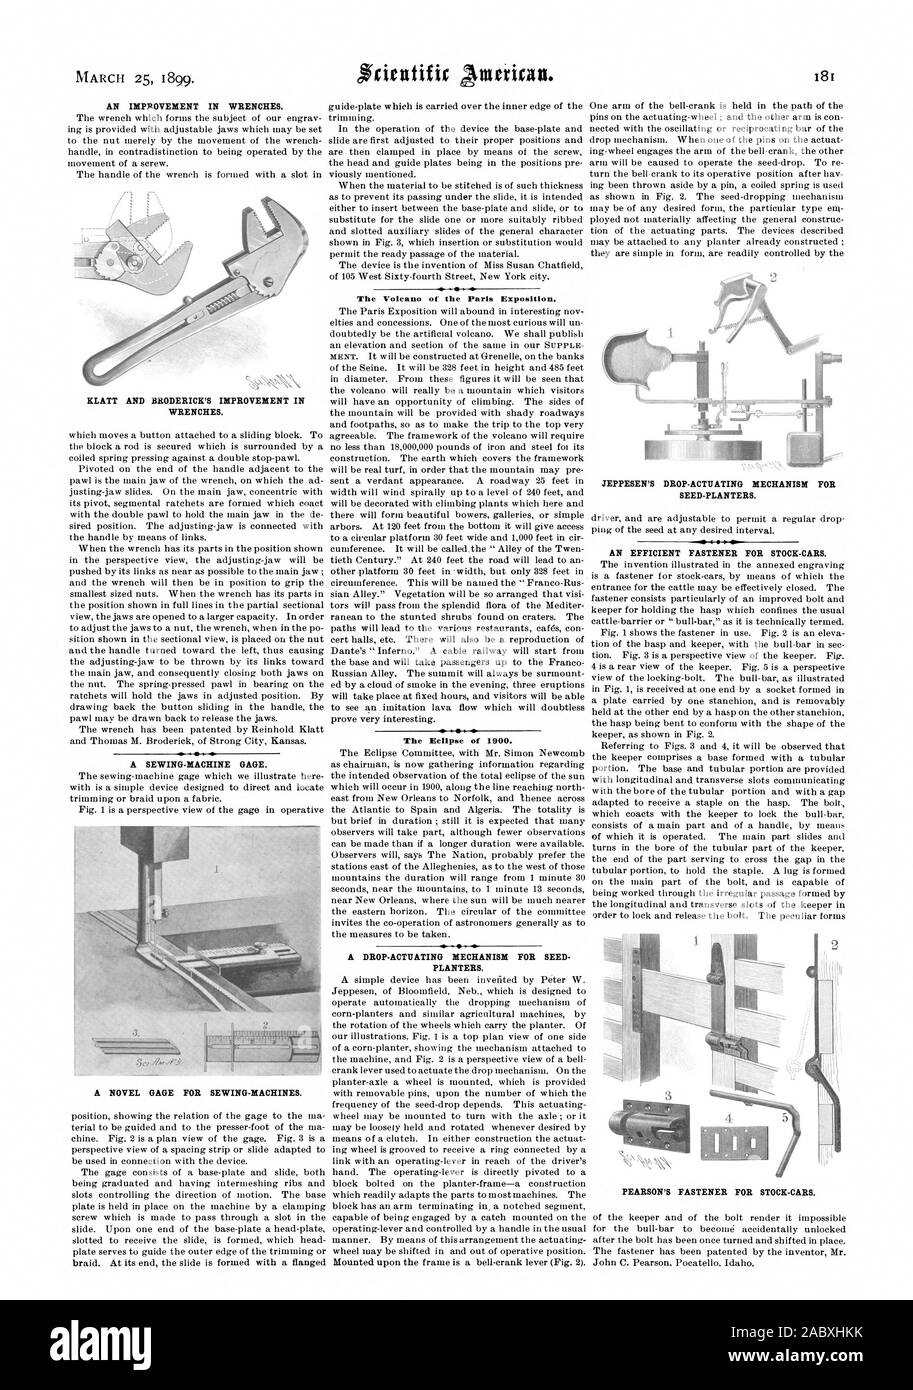 The Volcano of the Paris Exposition. The Eclipse of 1900. PLANTERS. JEPPESEN'S DROP-ACTUATING MECHANISM FOR SEED-PLANTERS. AN EFFICIENT FASTENER FOR STOCK-CARS. KLATT AND BRODERICK'S IMPROVEMENT IN WRENCHES. A NOVEL GAGE FOR SEWING-MACHINES., scientific american, 1899-03-25 Stock Photo